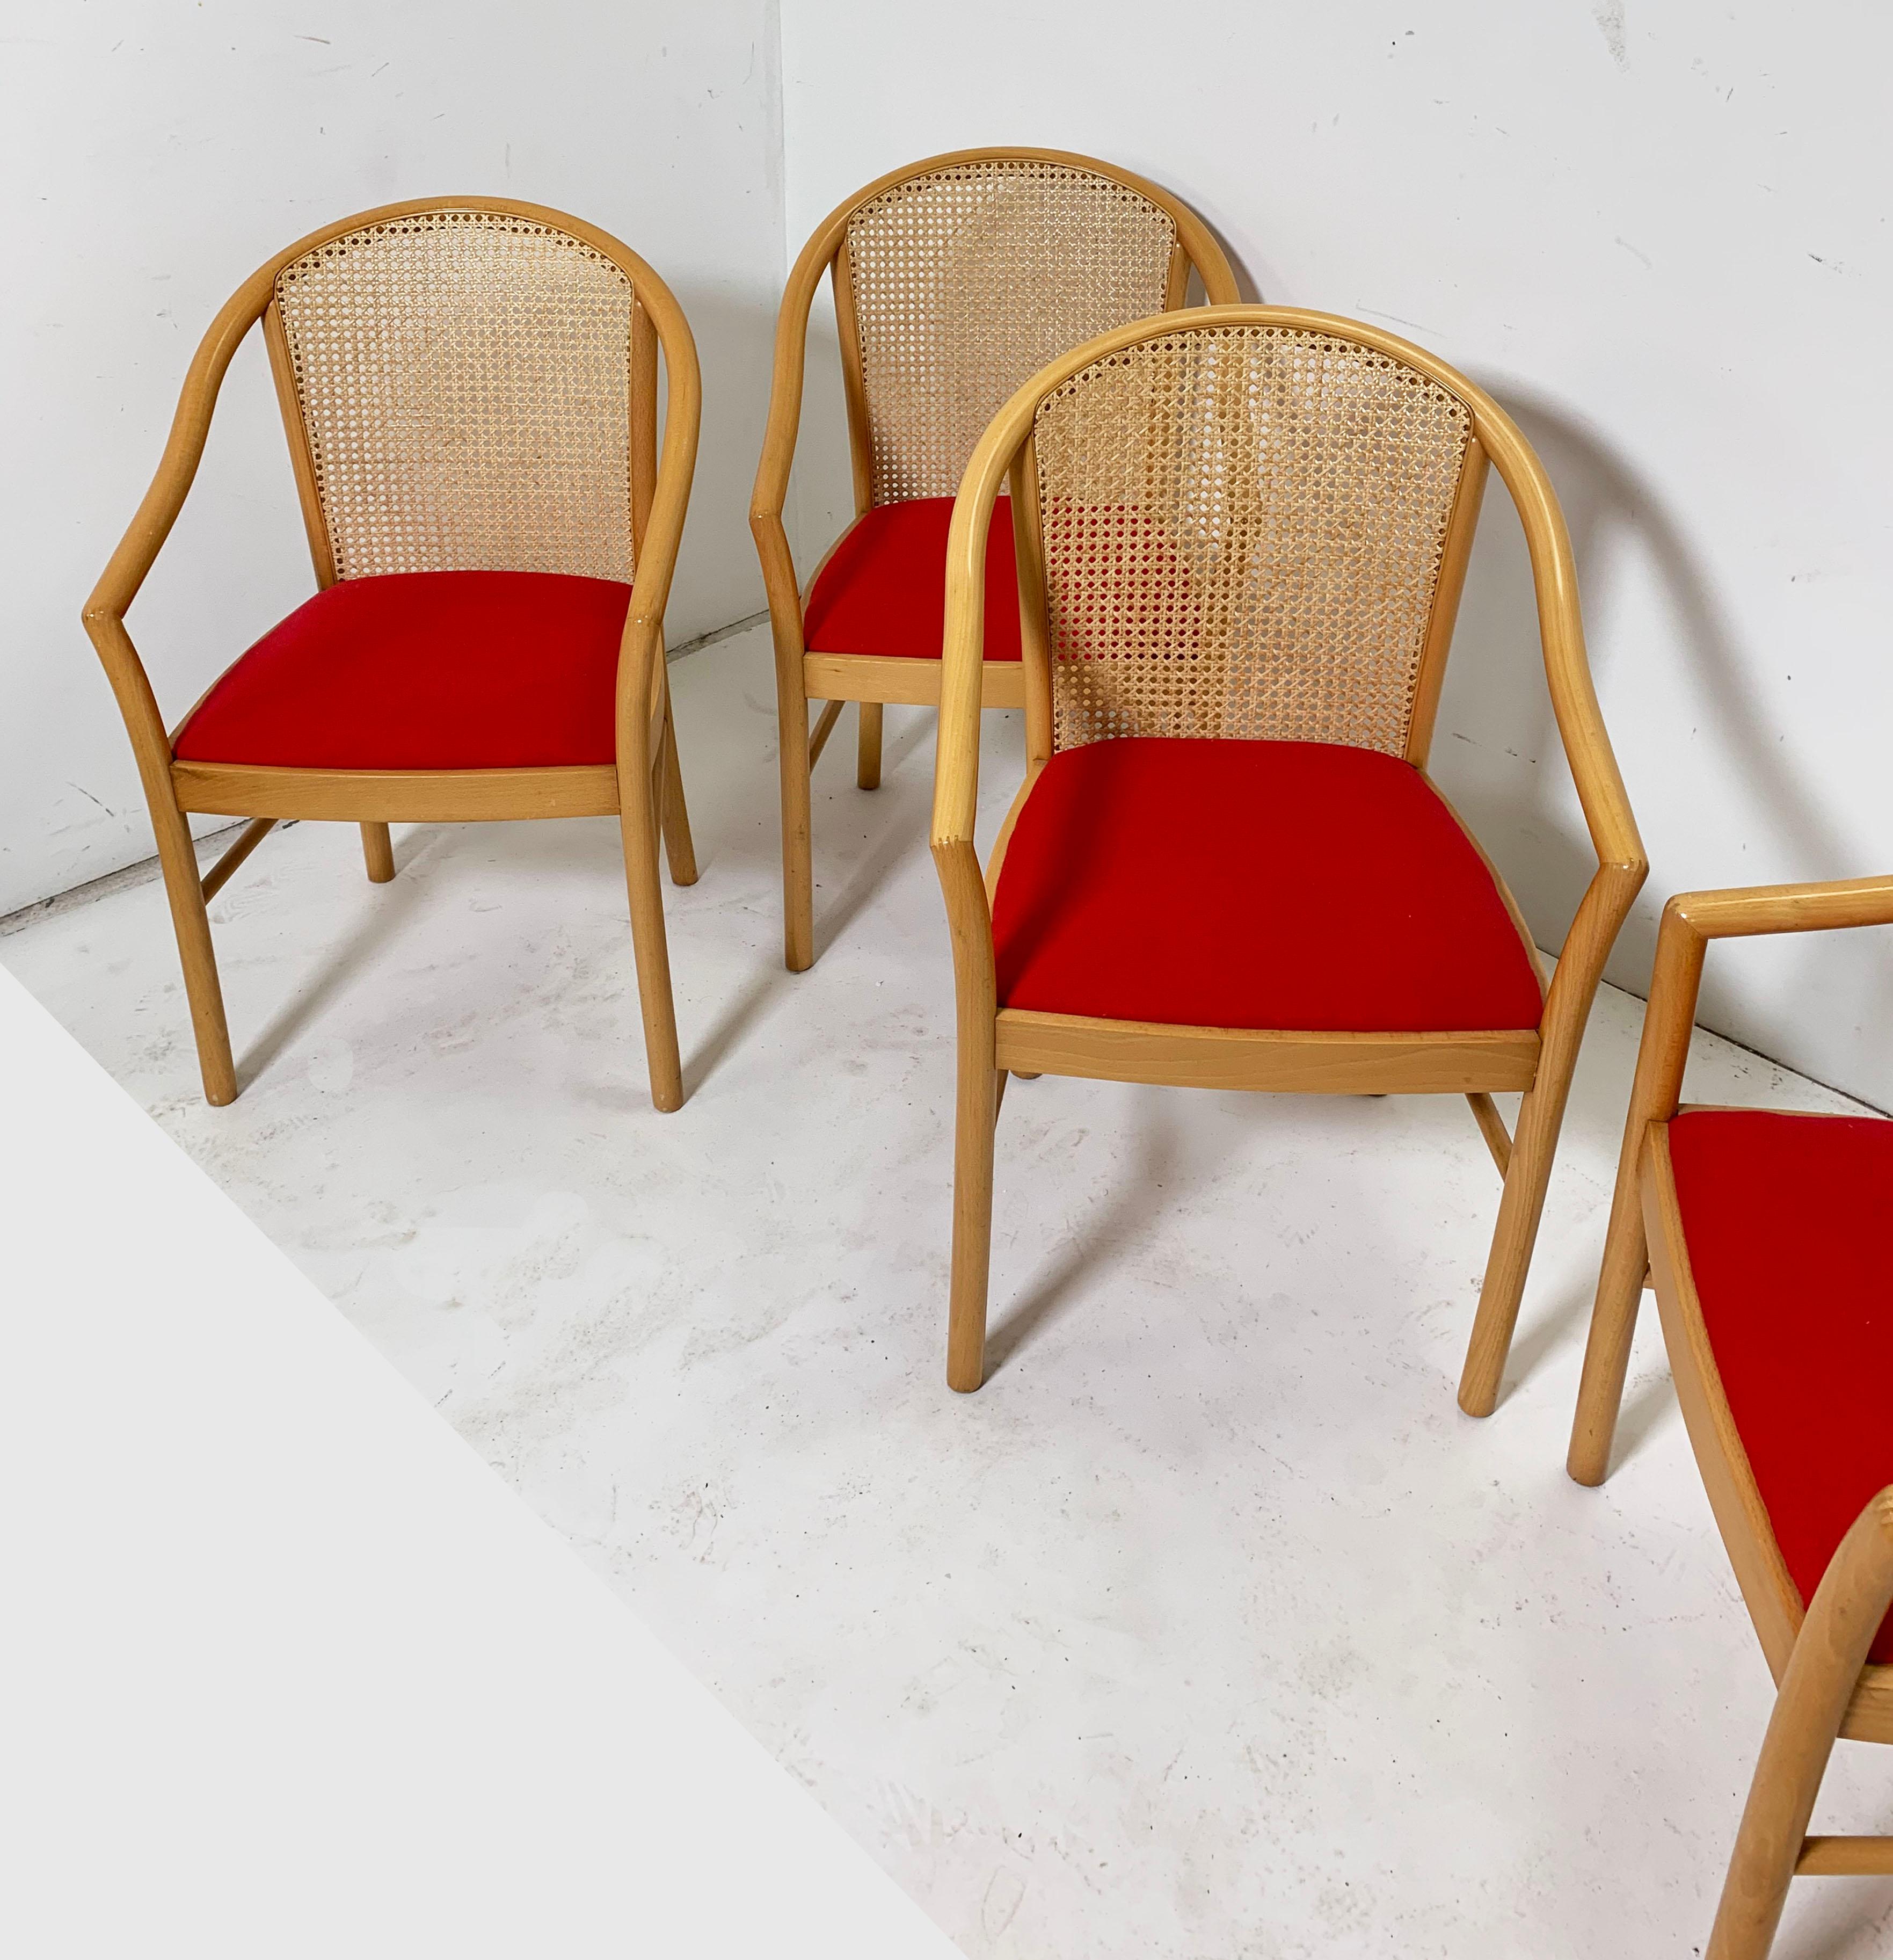 A set of six Italian dining chairs in birch with cane backs by Stendig, made in Italy and sold through Workbench, USA, circa 1980s.